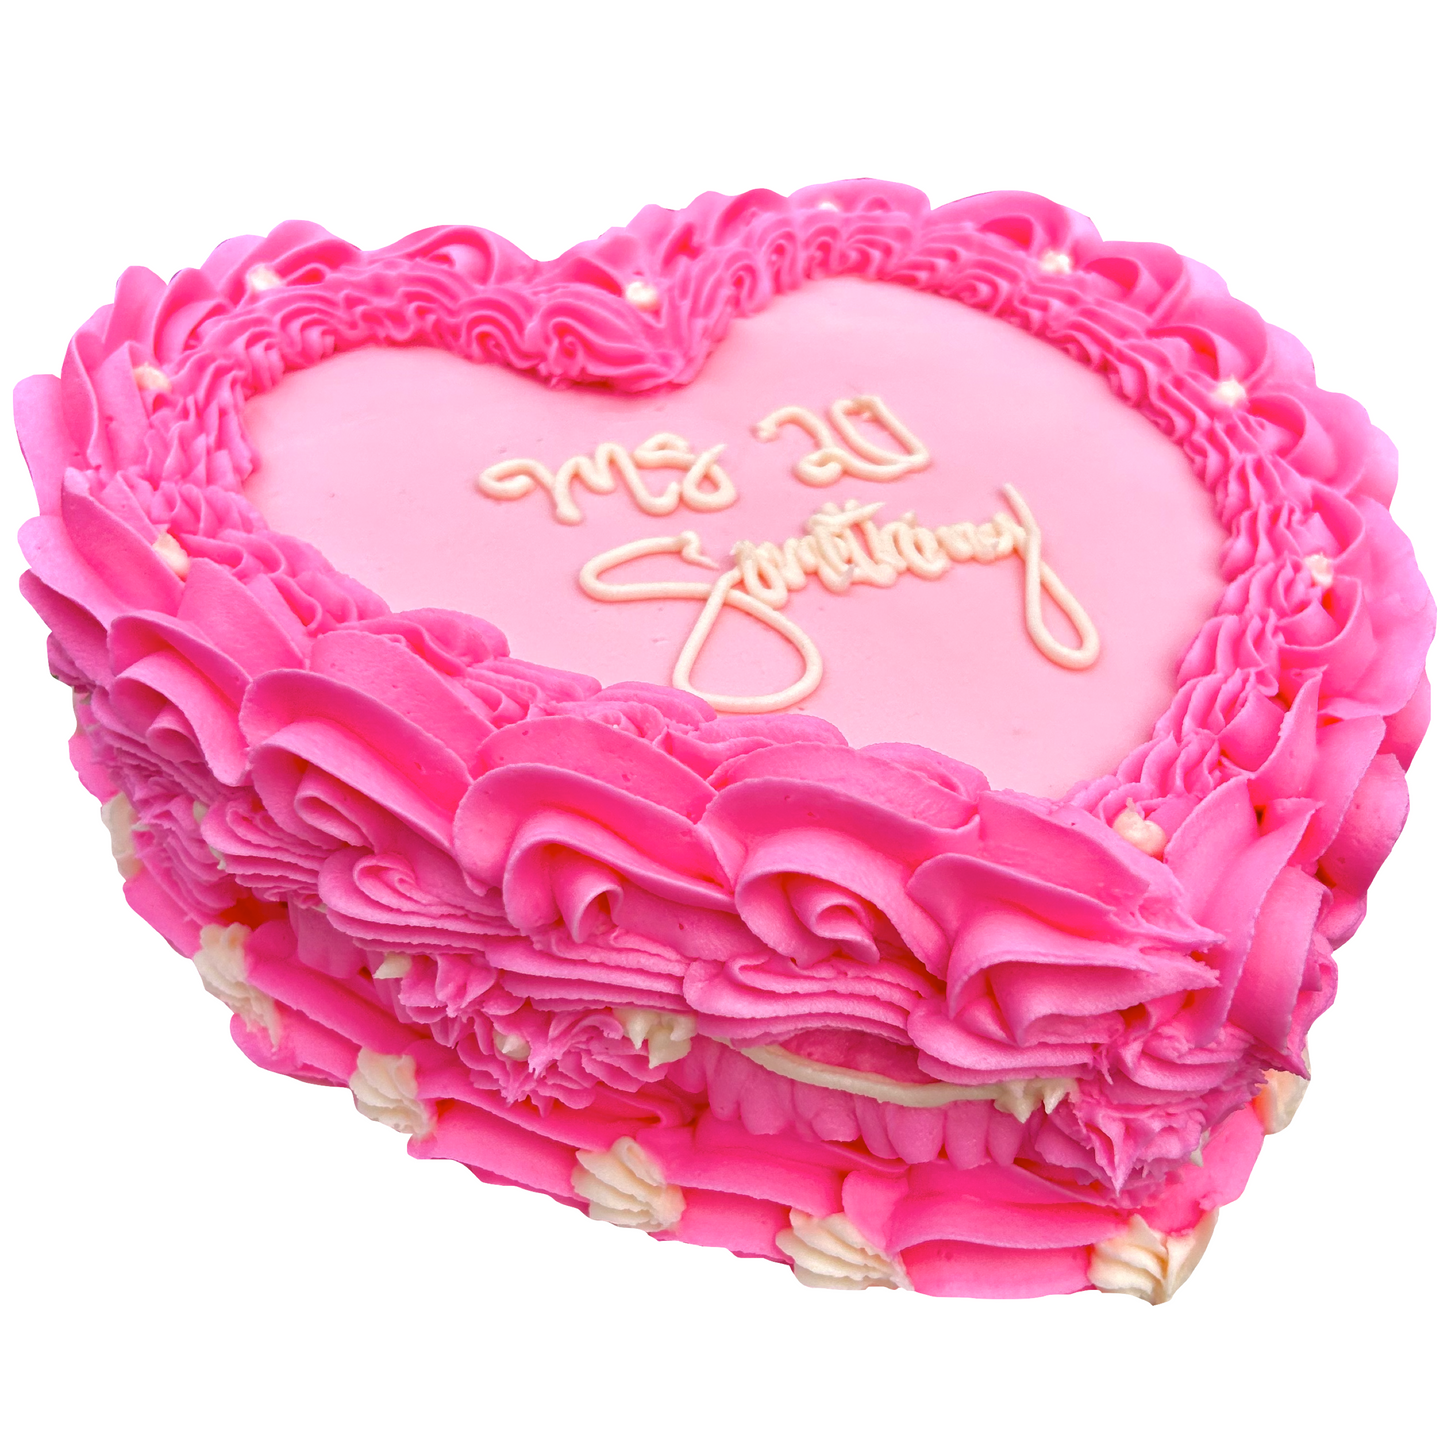 Traditional Heart Cake